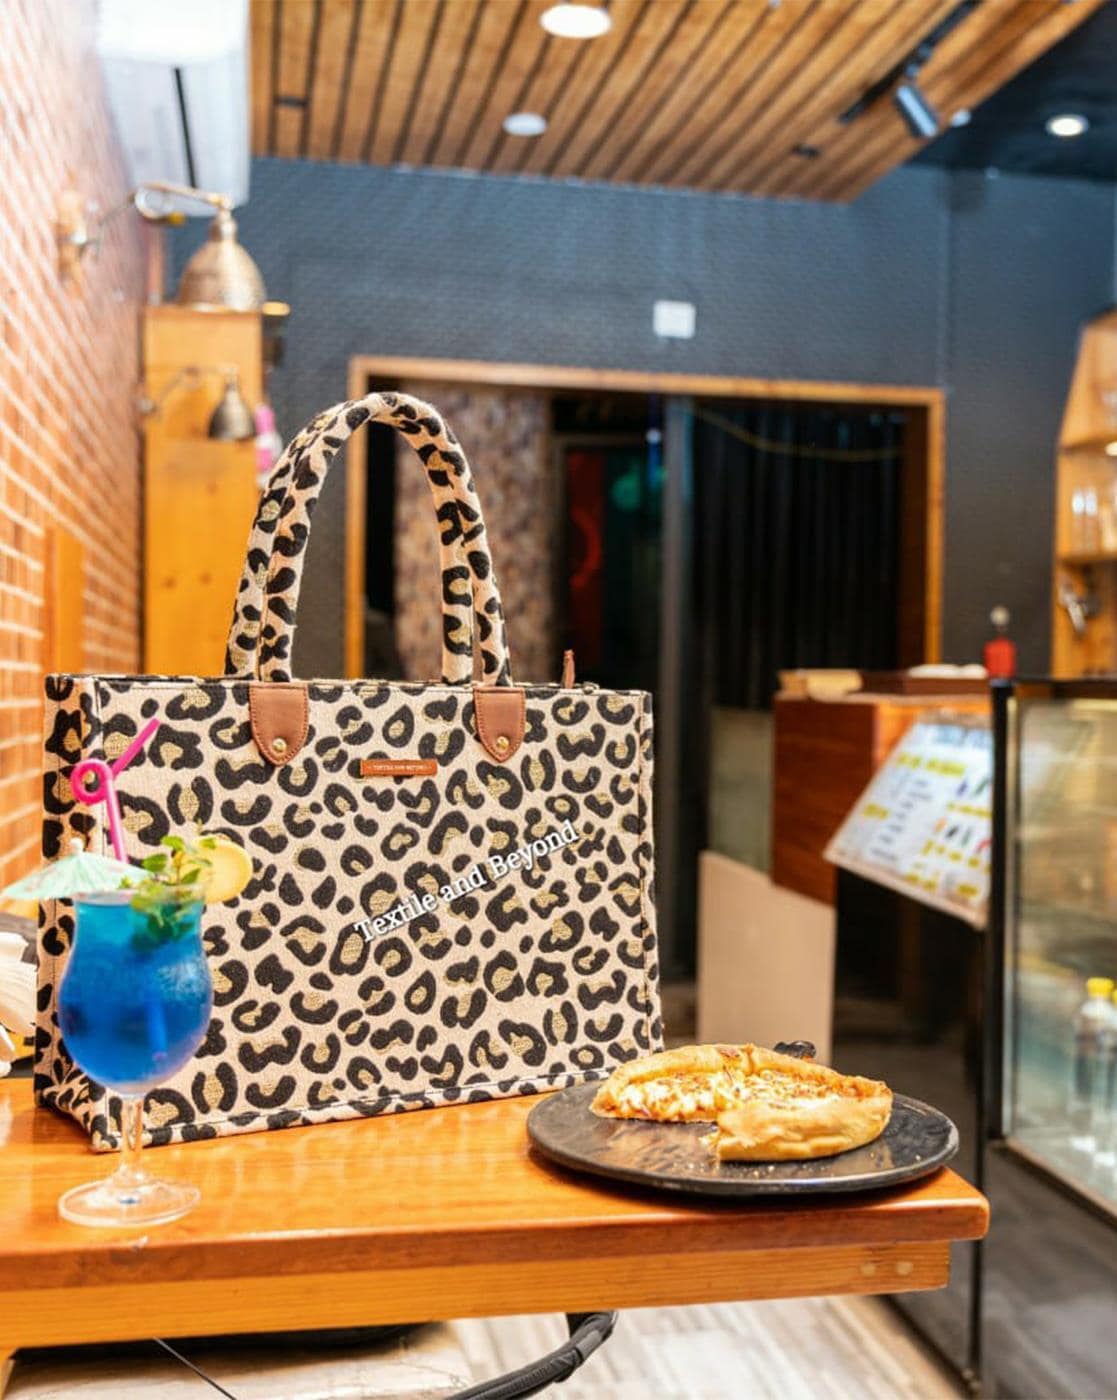 Textile And Beyond Leopard Print Tote Bag For Women (Multi, FS)